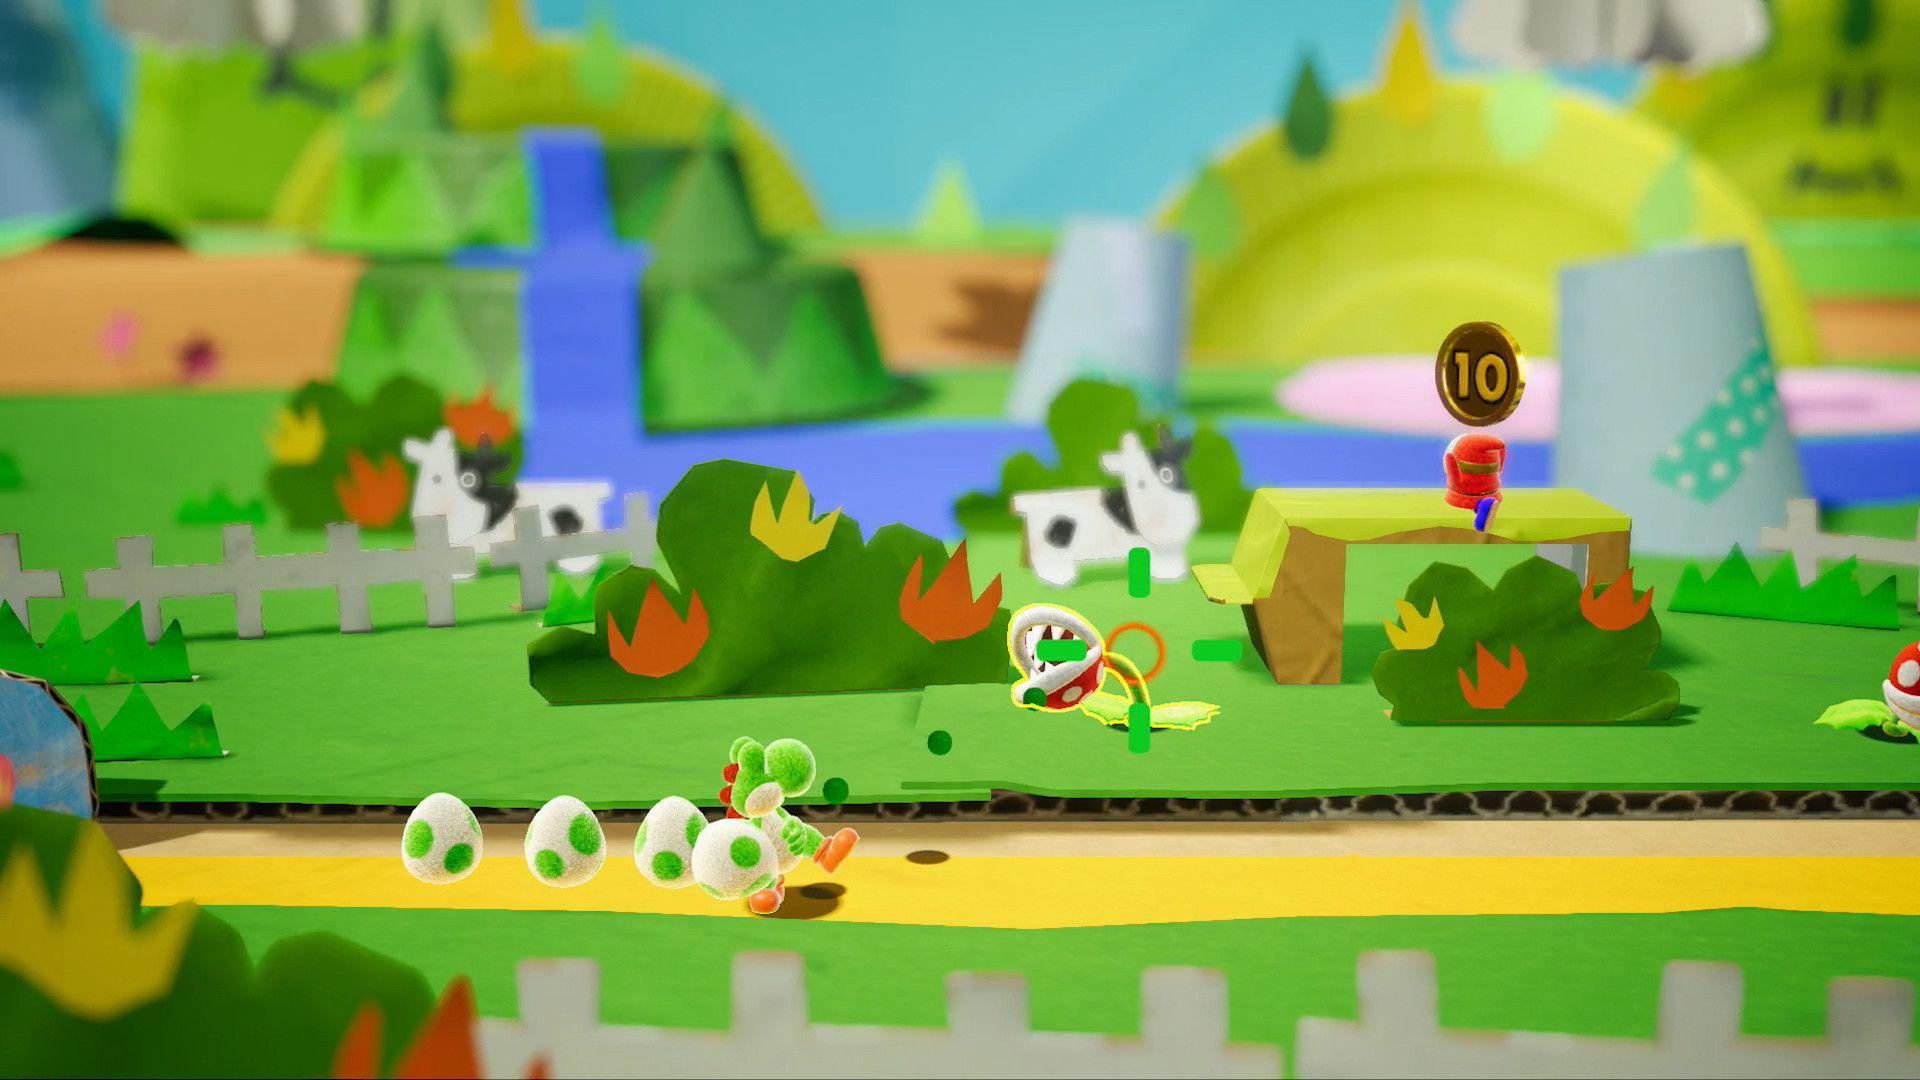 Yoshi's Crafted World comes to Switch during spring 2019